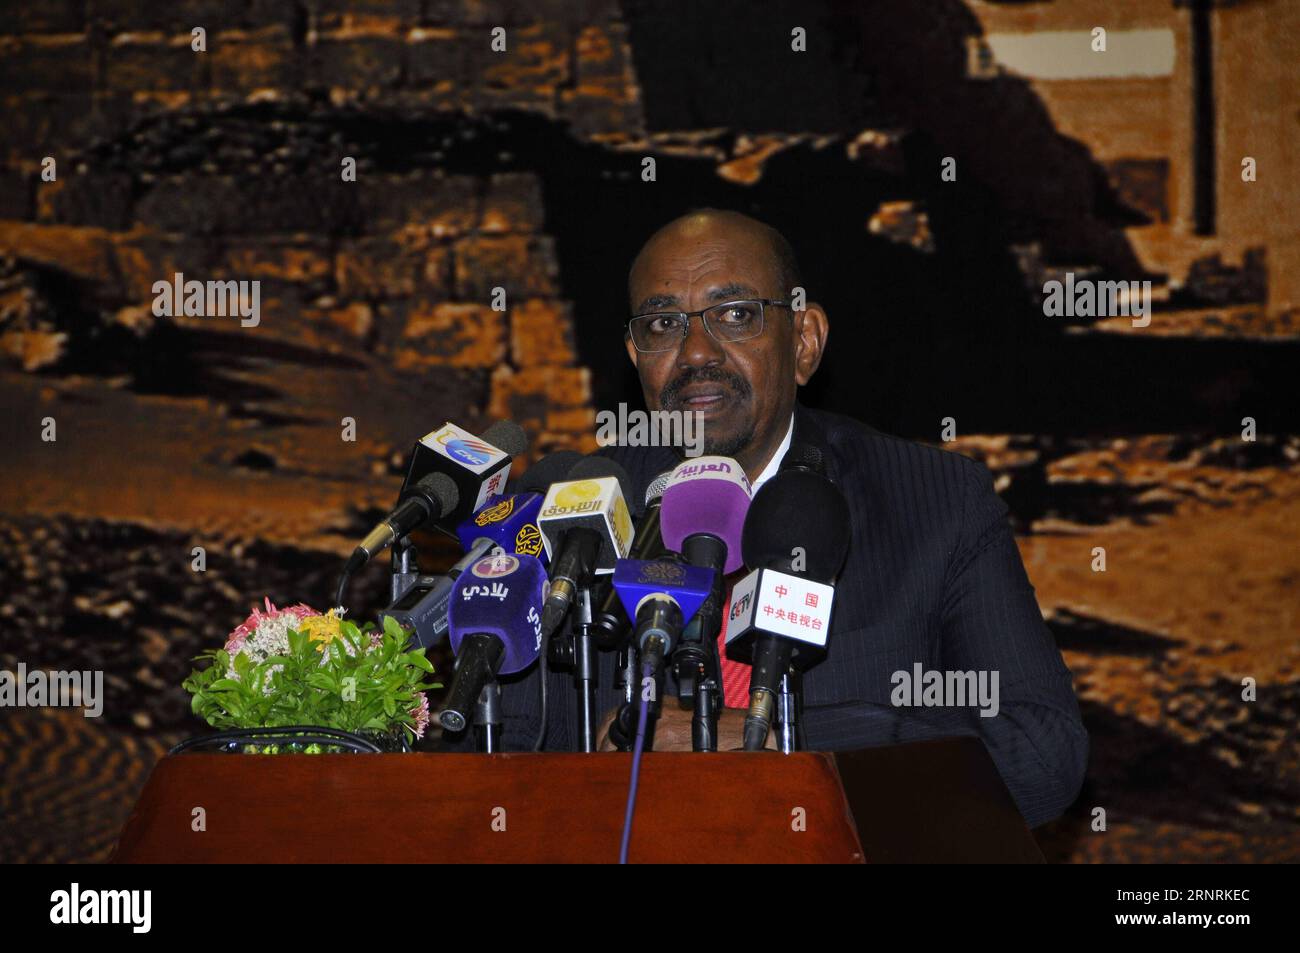 (171005) -- KHARTOUM, Oct. 5, 2017 -- Sudanese President Omar al-Bashir speaks during a joint press conference with his Somali counterpart Mohamed Abdullahi Mohamed (not seen in picture) in Khartoum, capital of Sudan, on Oct. 5, 2017. Omar al-Bashir said on Thursday that his country would exert utmost efforts for peace and stability in Somalia. The President made the remarks at a joint press conference after a meeting with Mohamed Abdullahi Mohamed in the capital. ) SUDAN-KHARTOUM-PRESIDENT-SOMALI PRESIDENT-EFFORTS FOR PEACE AND STABILITY IN SOMALIA Mohamed?Khidir PUBLICATIONxNOTxINxCHN Stock Photo